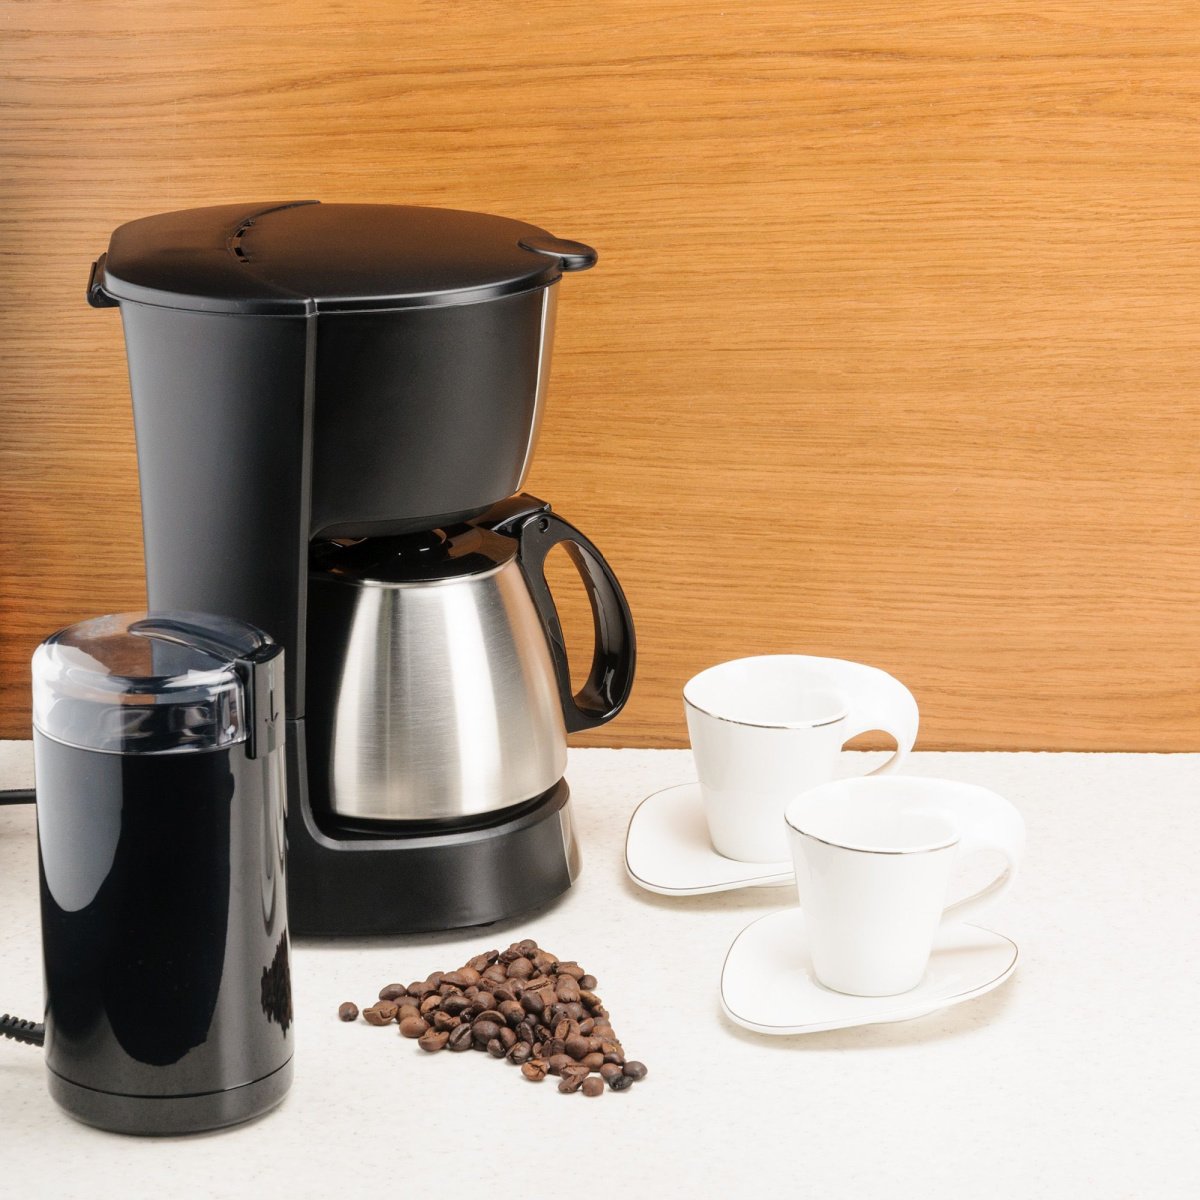 stainless steel carafe coffee maker on table with cofee beans and cups